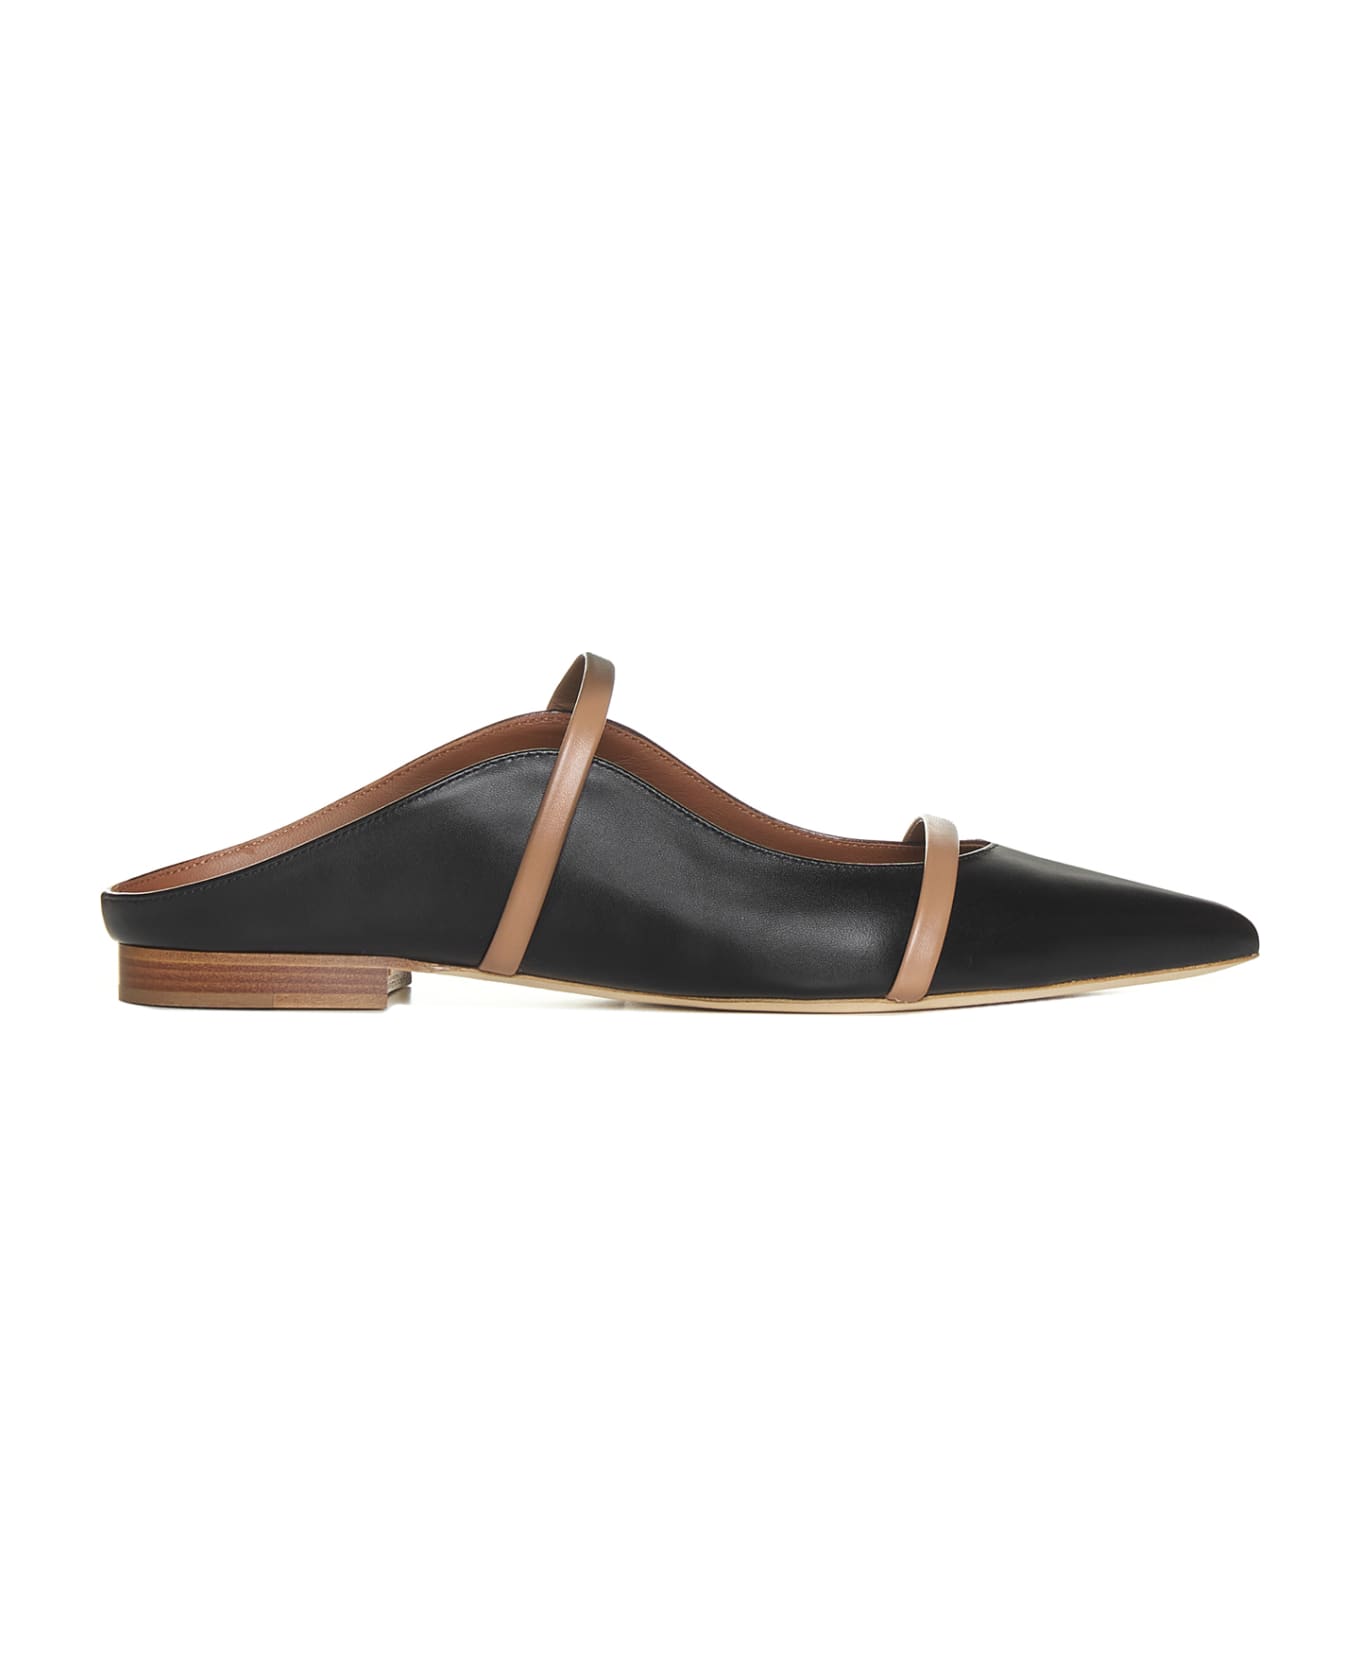 Malone Souliers Flat Shoes - Black nude